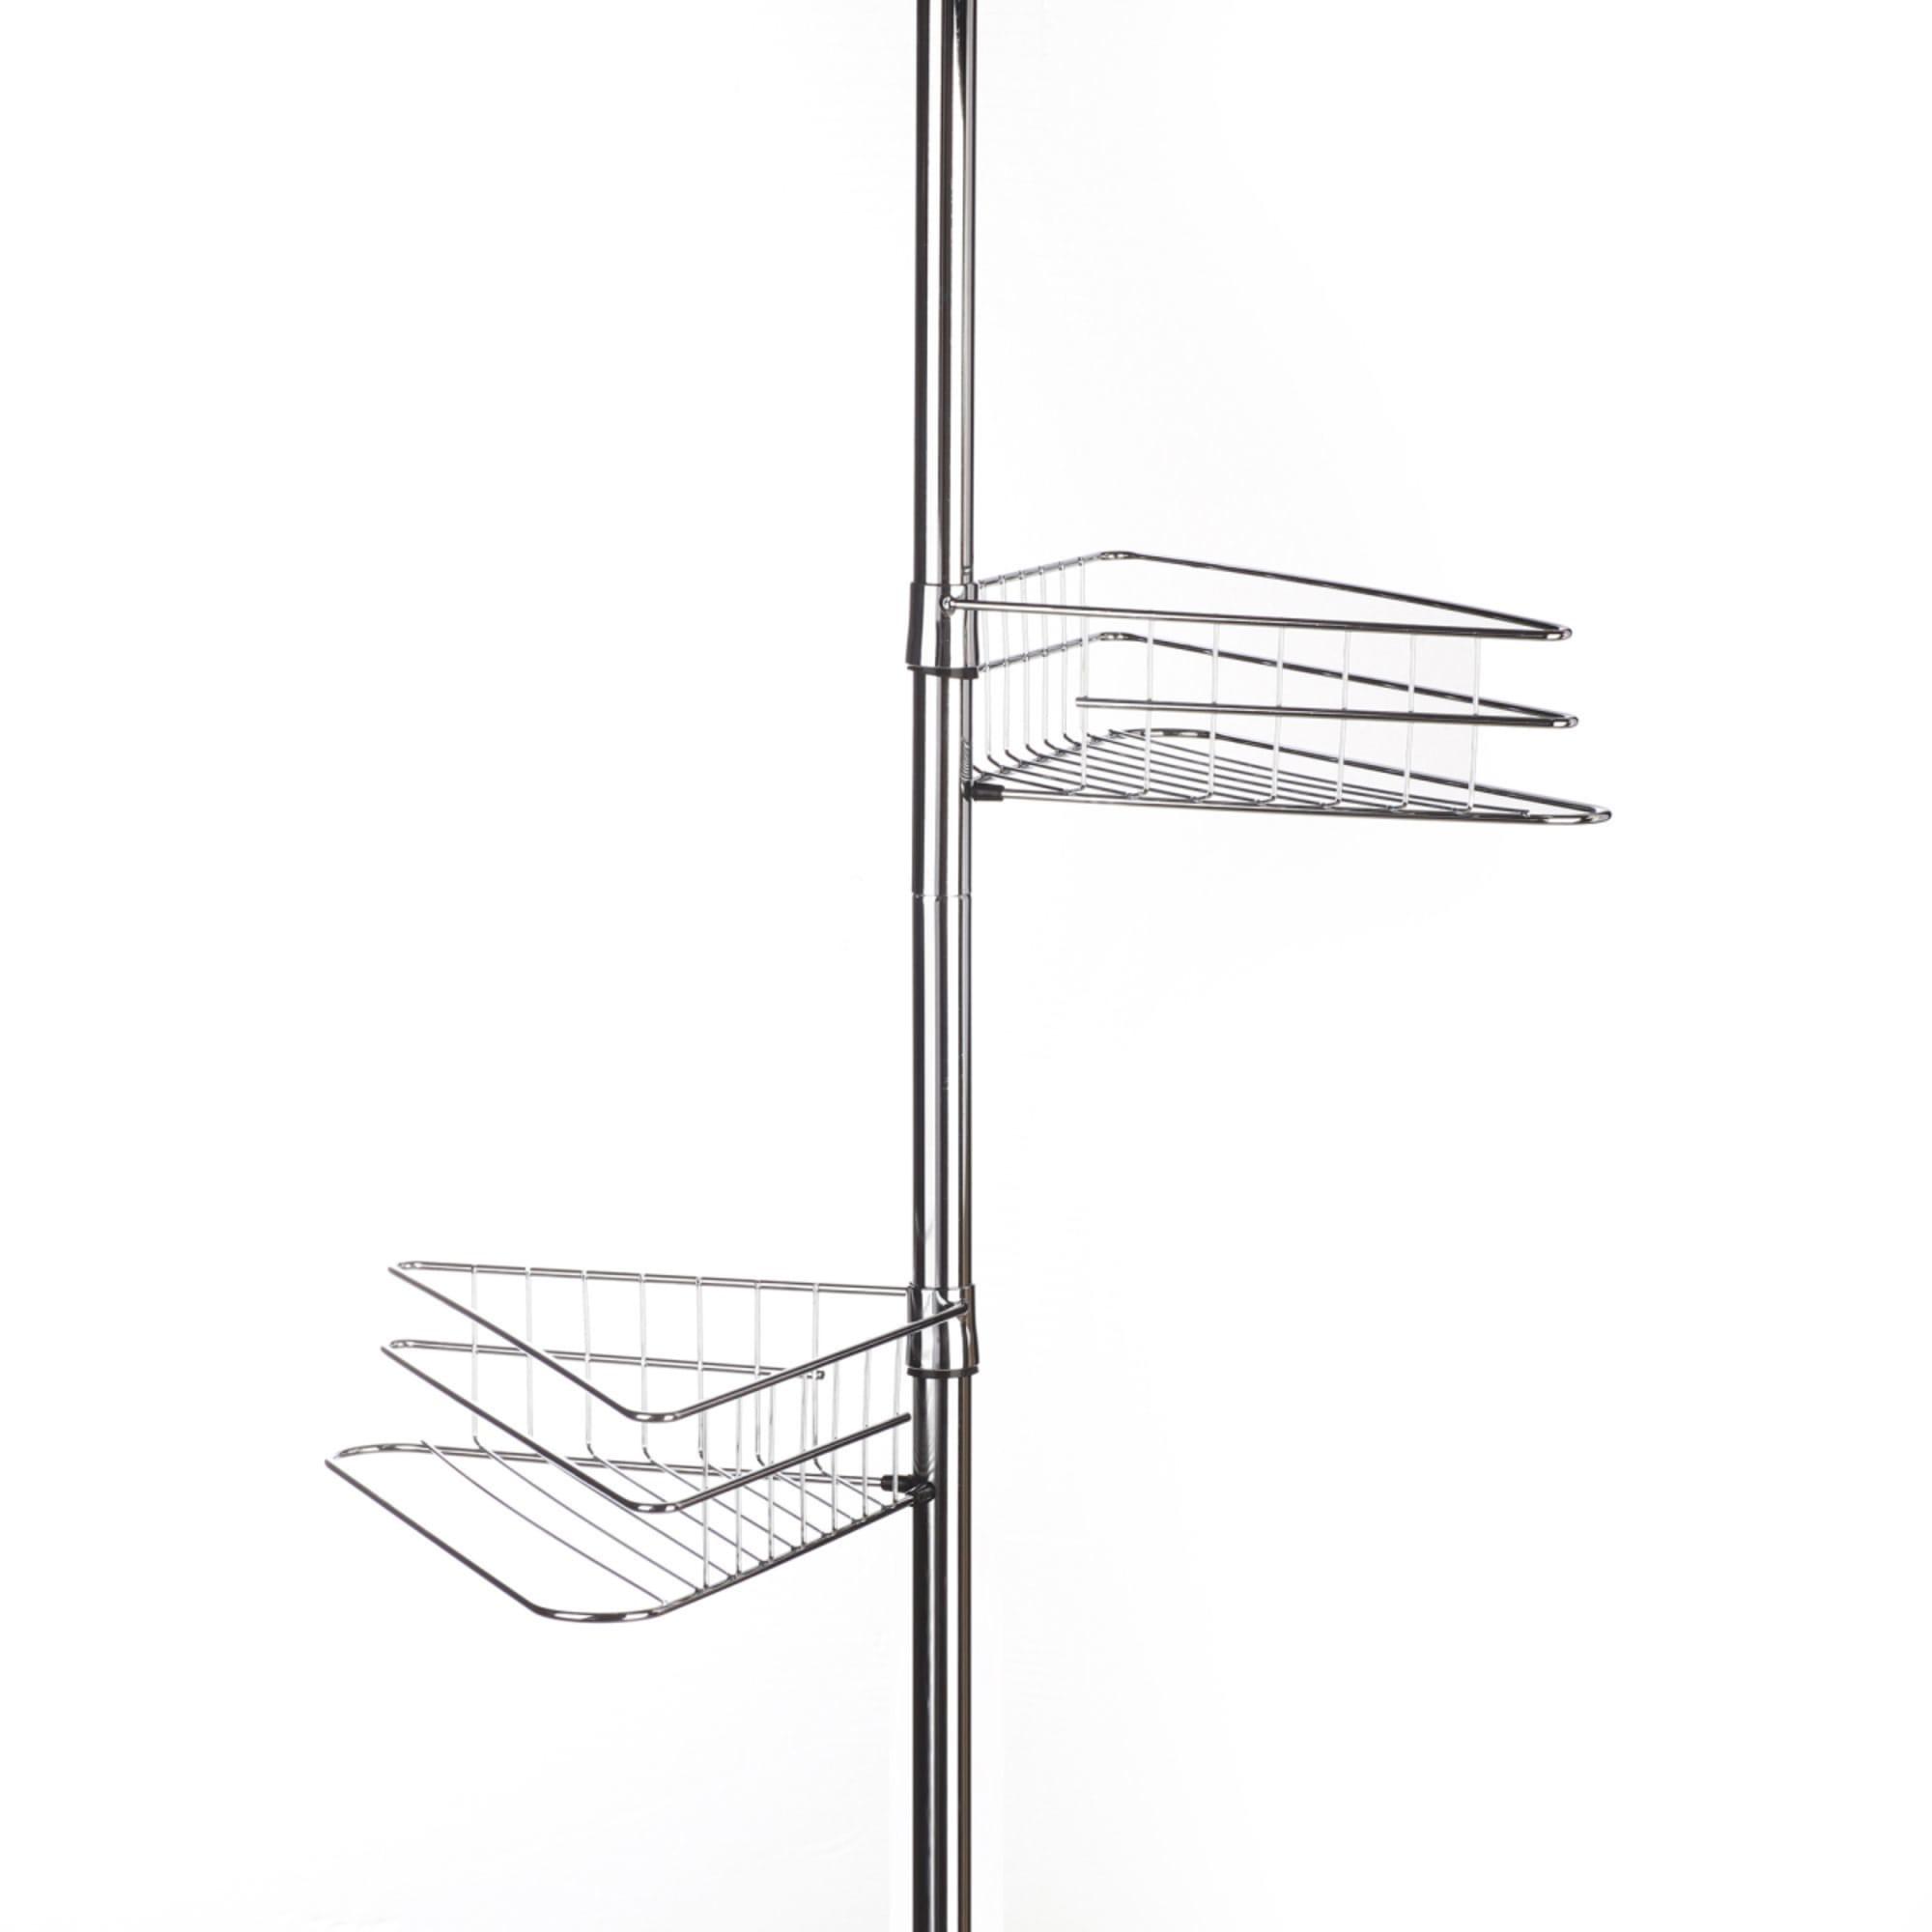 Sherwood Home 4 Tier Shower Caddy Silver Image 5